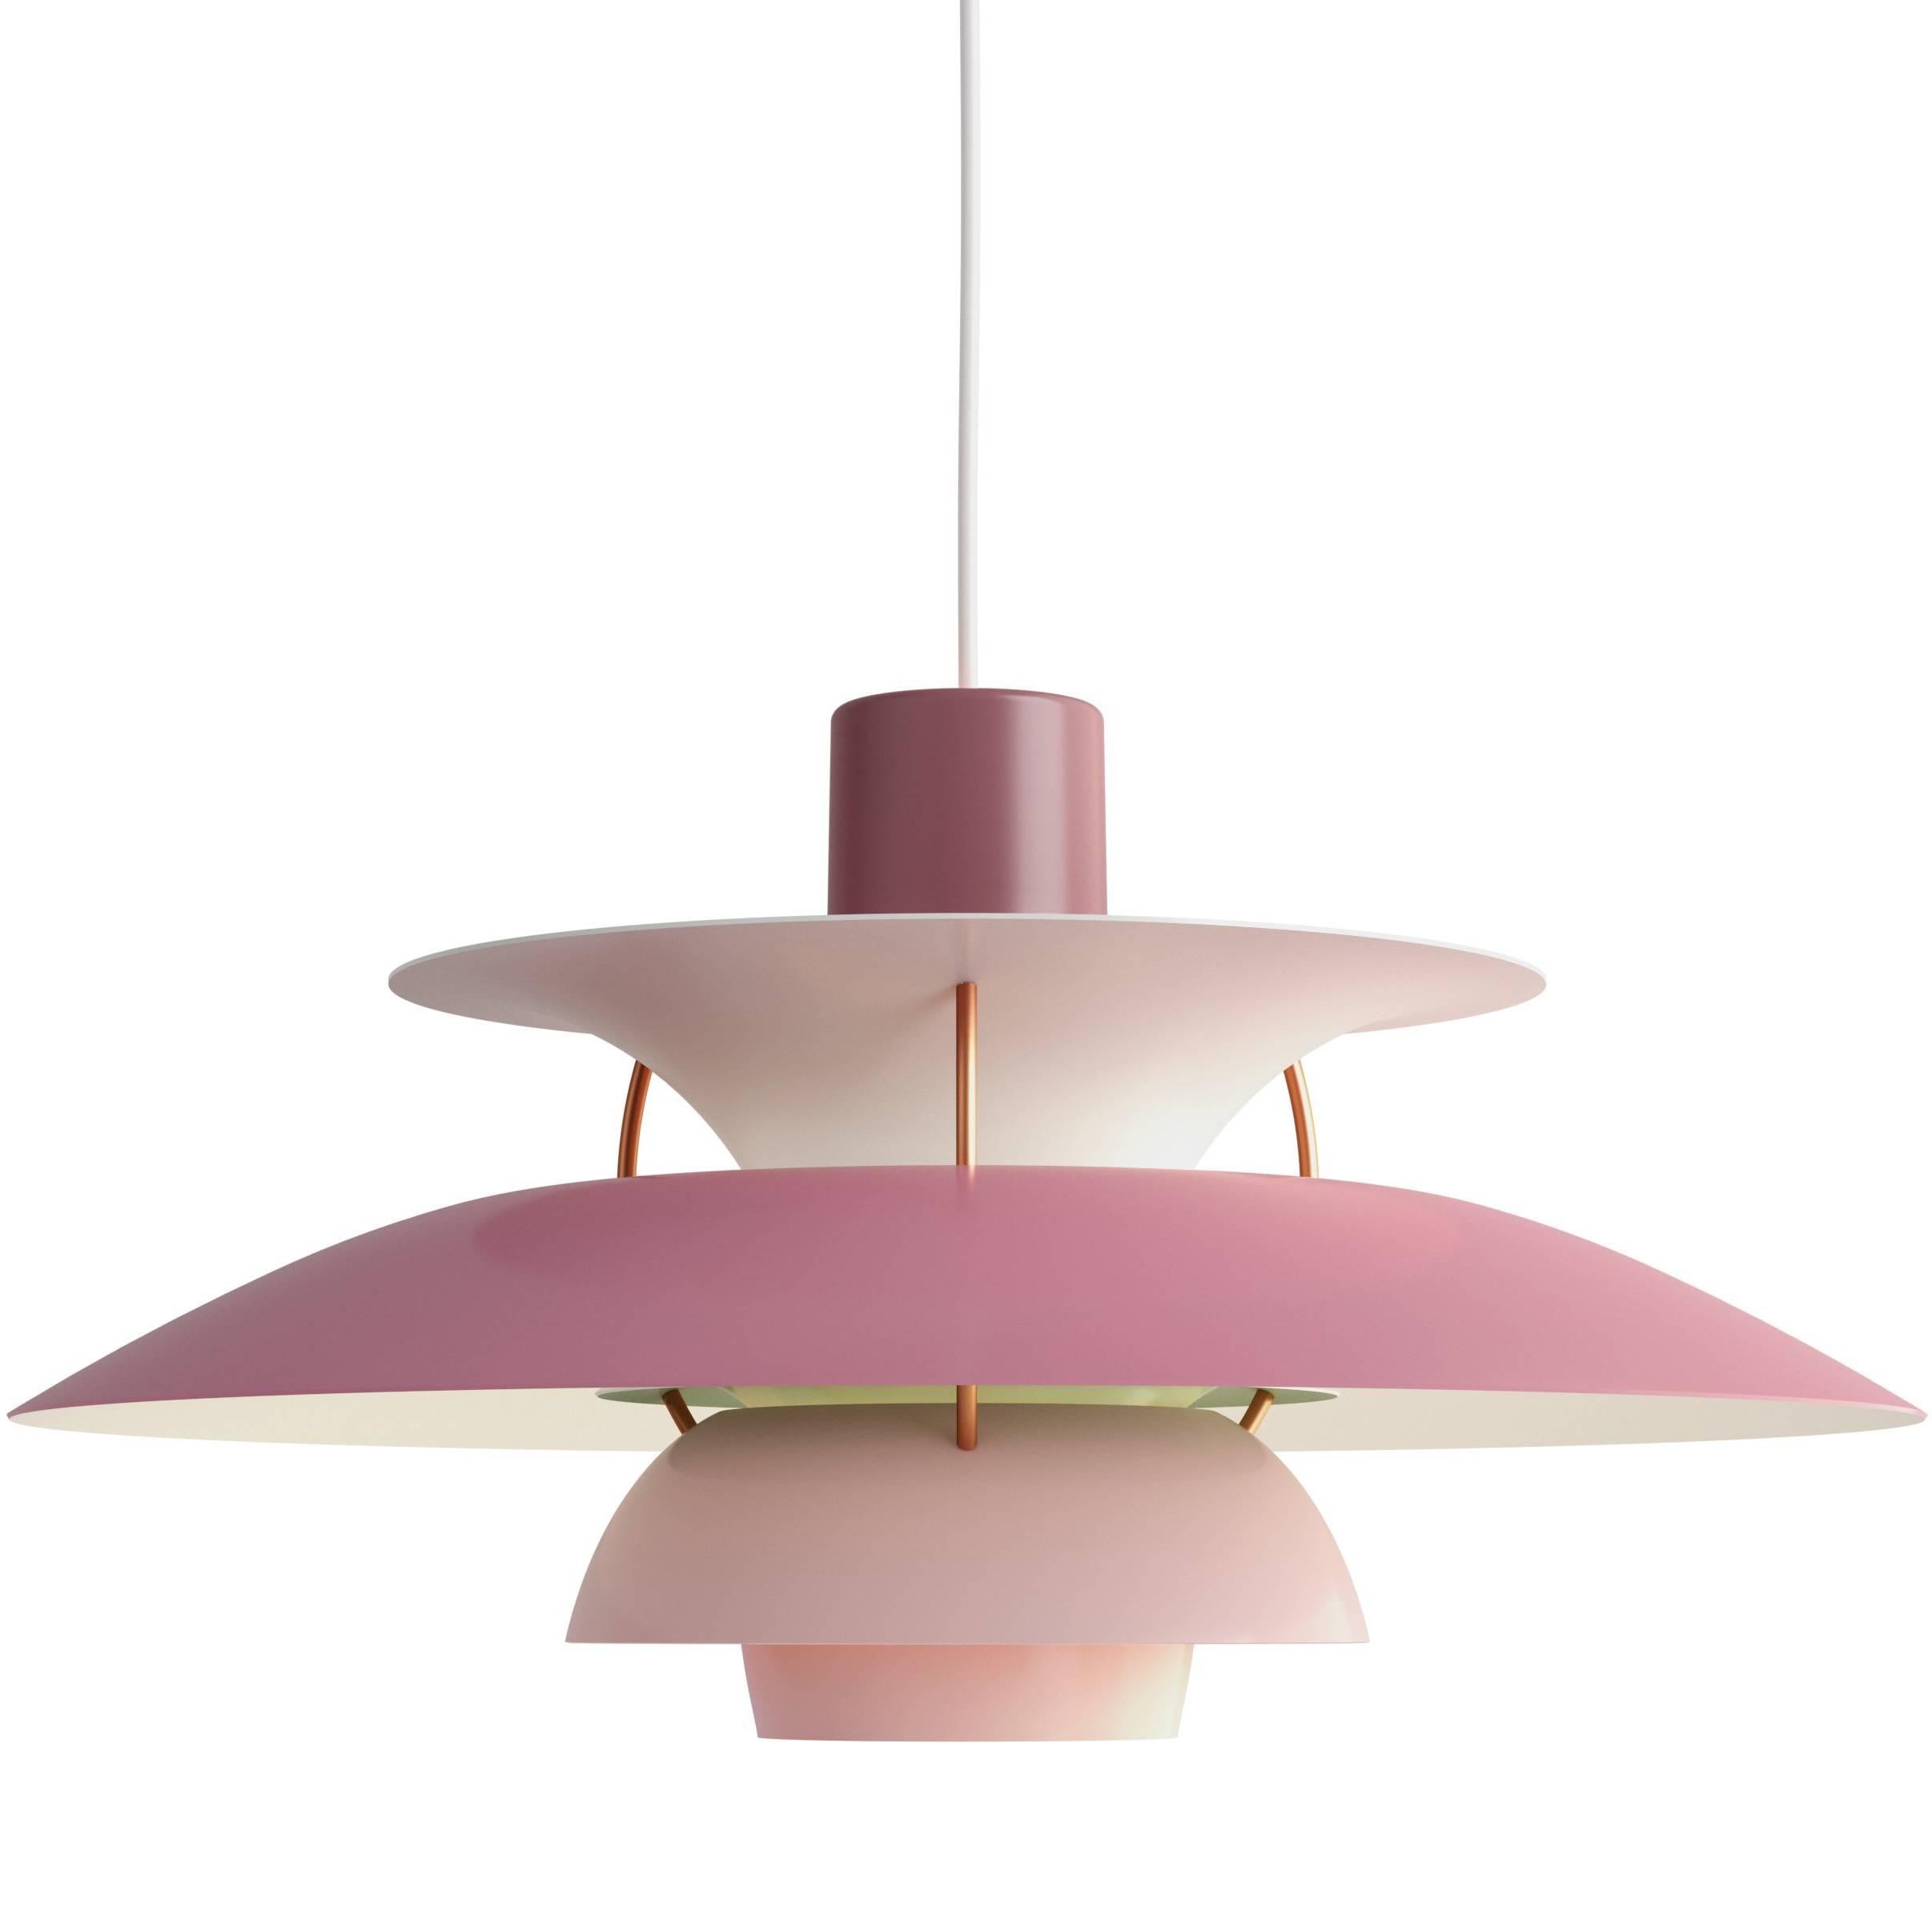 Poul Henningsen PH 5 Brass Pendant for Louis Poulsen In New Condition For Sale In Glendale, CA